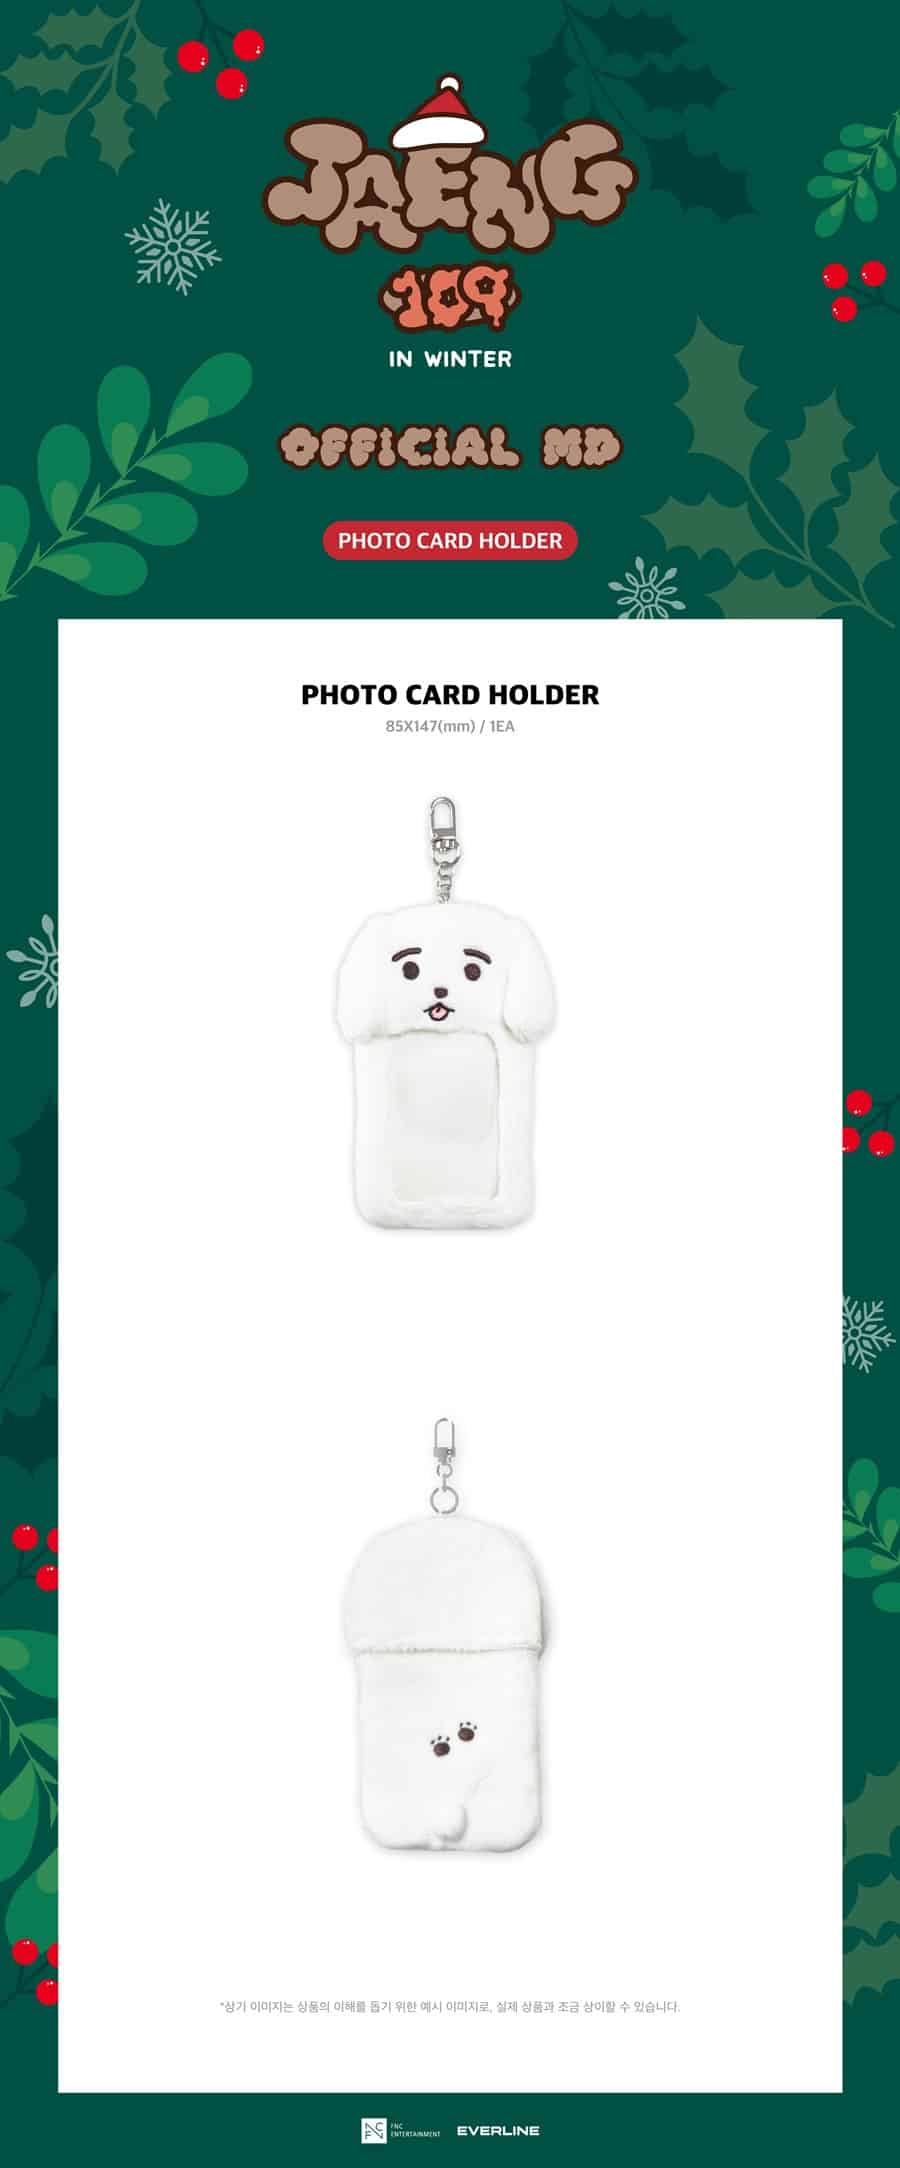 jaeng109-in-winter-pop-up-official-md-photo-card-holder-wholesales